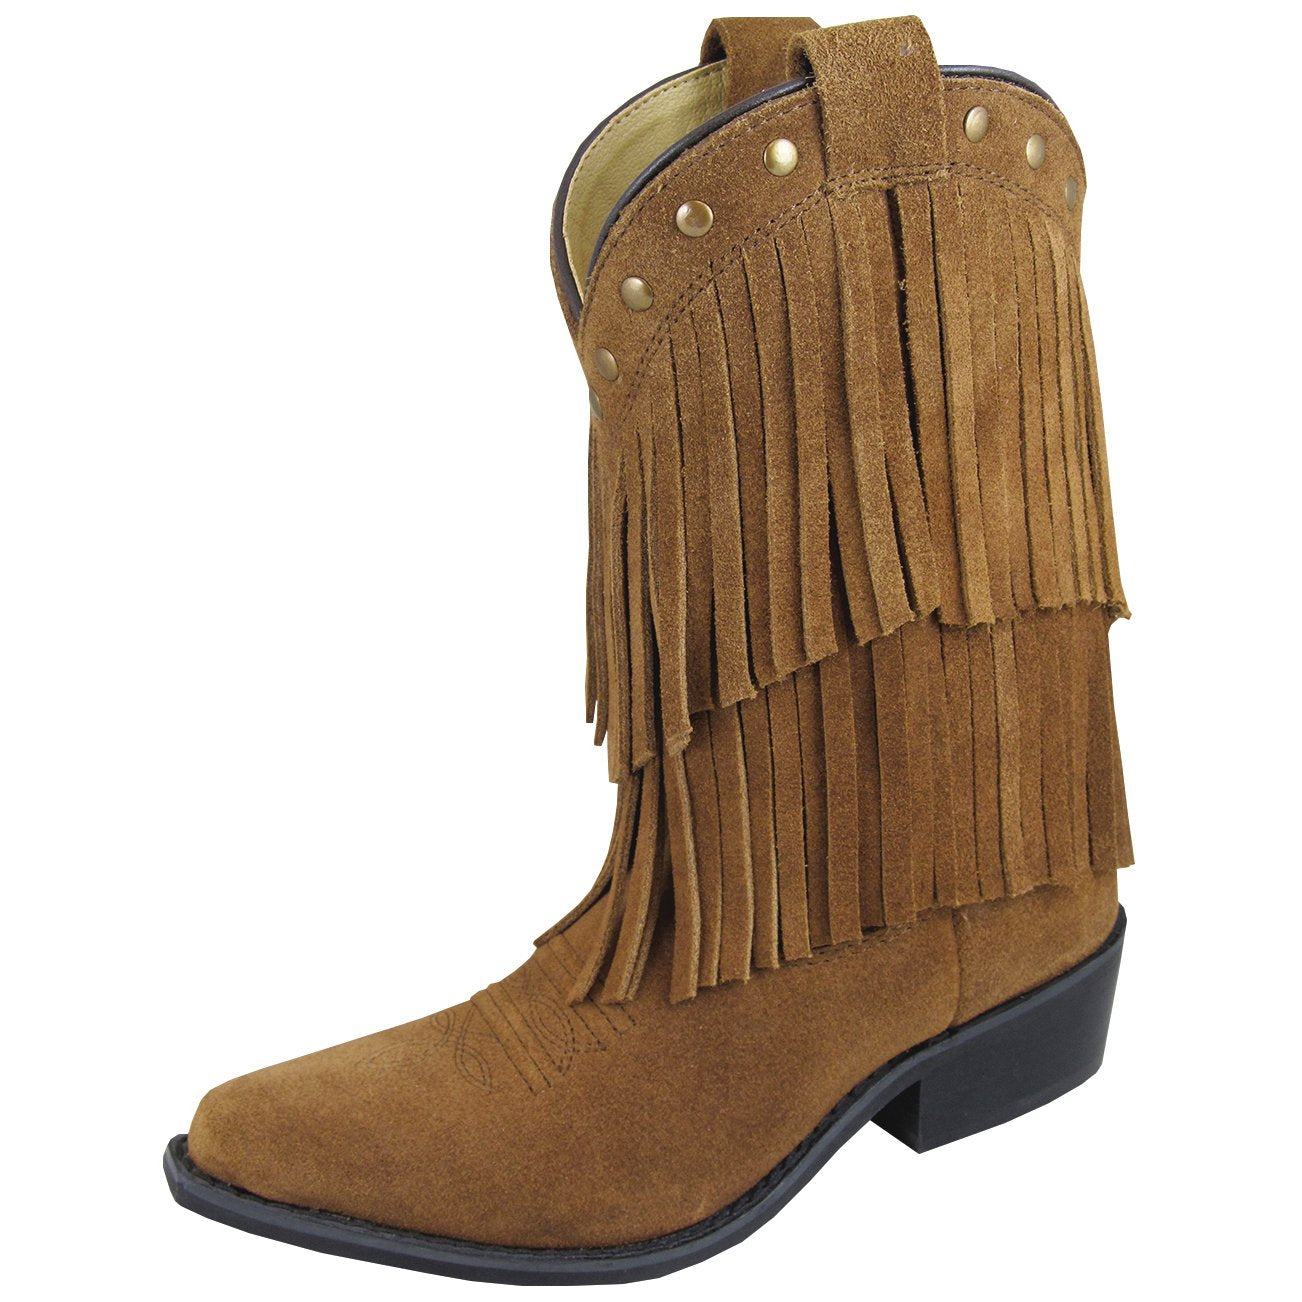 Smoky Mountain Girl's Children's Wisteria Brown Double Fringe Boot